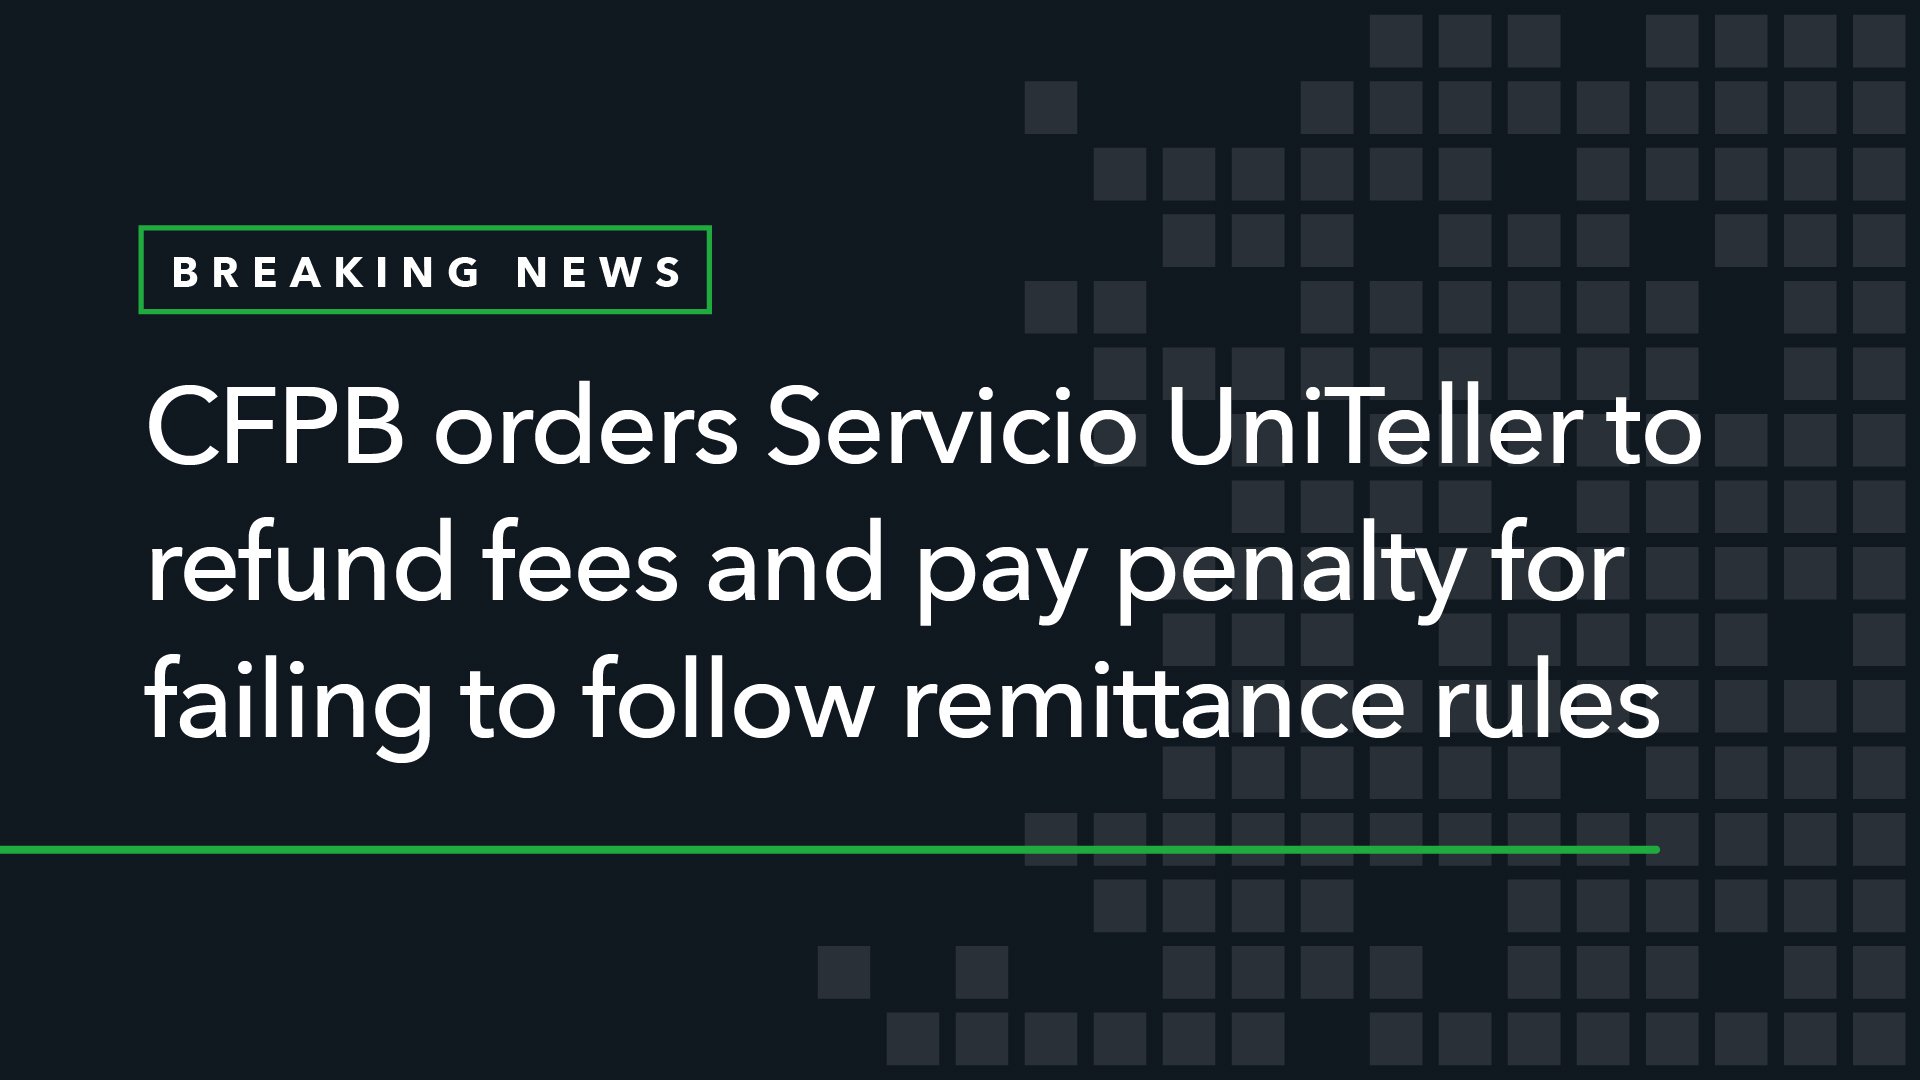 CFPB Orders Servicio UniTeller to Refund Fees and Pay Penalty for Failing to Follow Remittance Rules